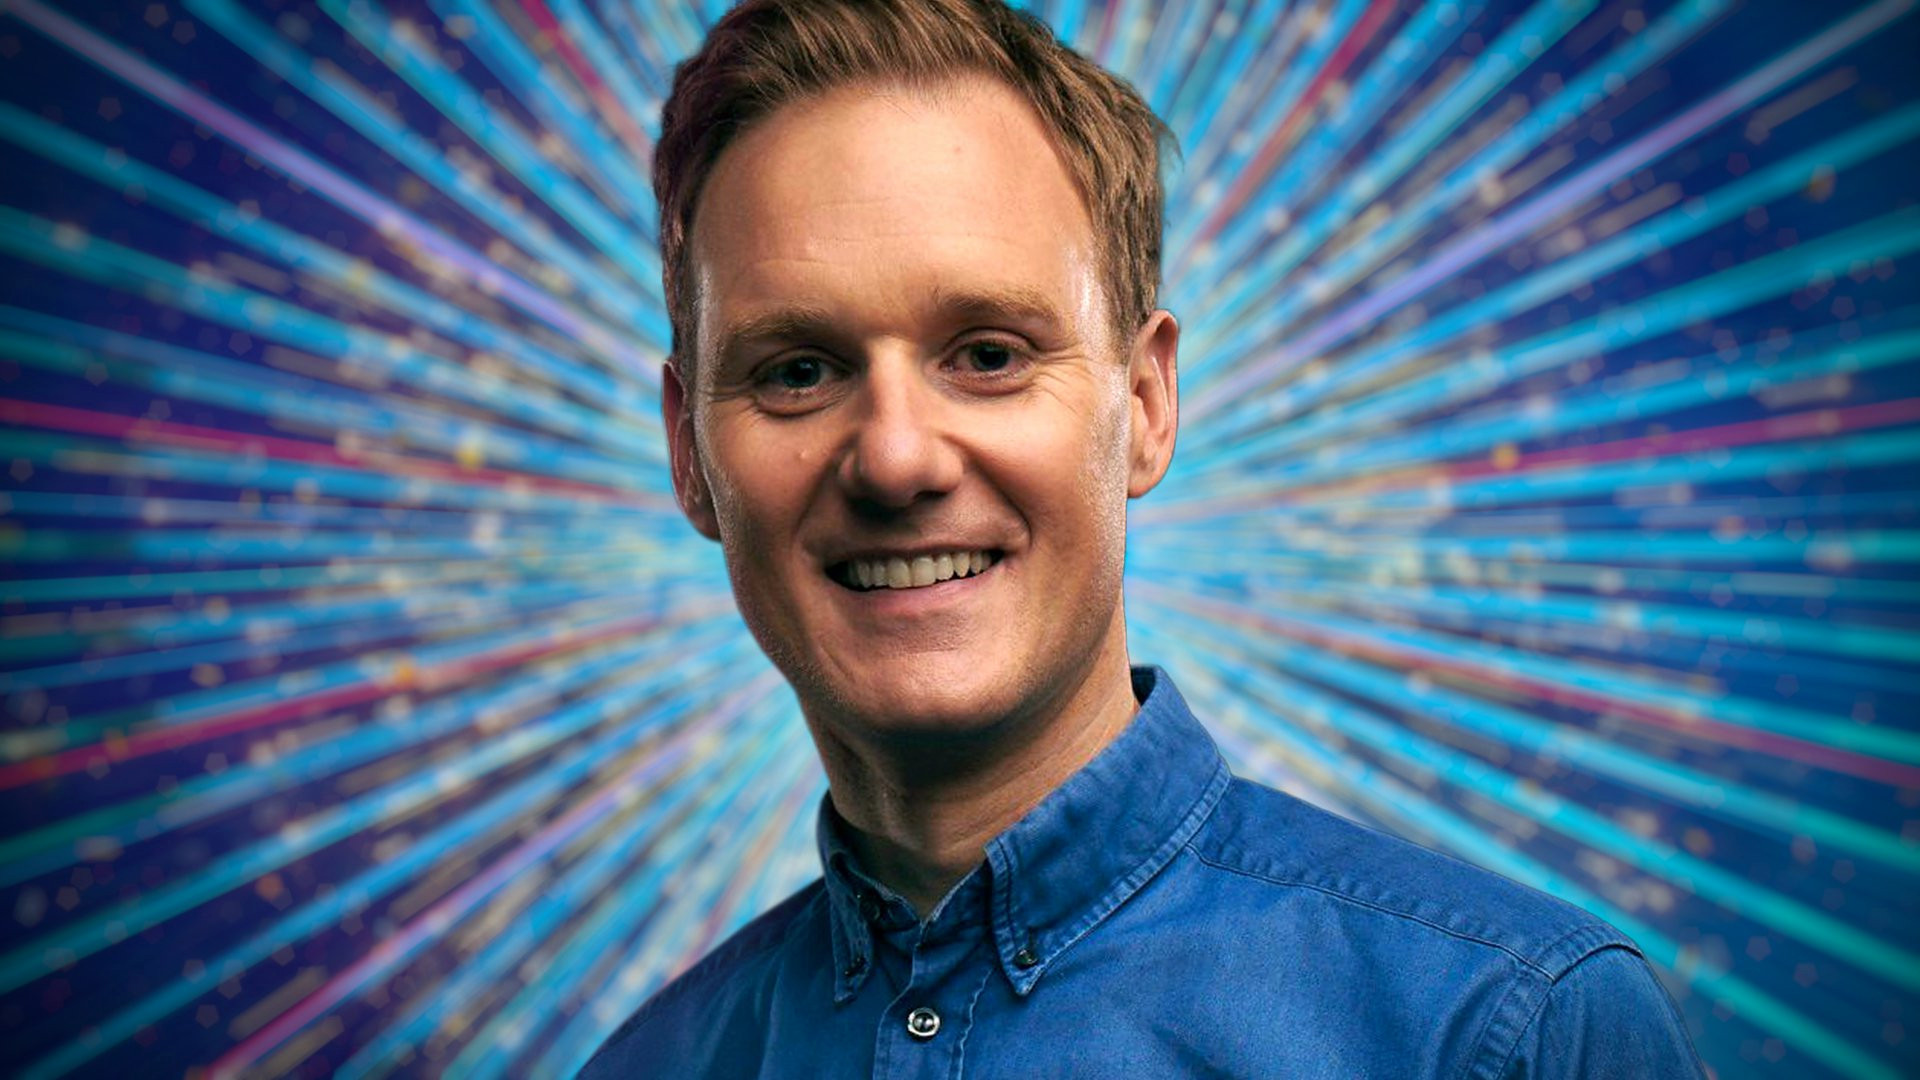 Strictly 2021 lineup: Who is Dan Walker? Height, wife, BBC career and more